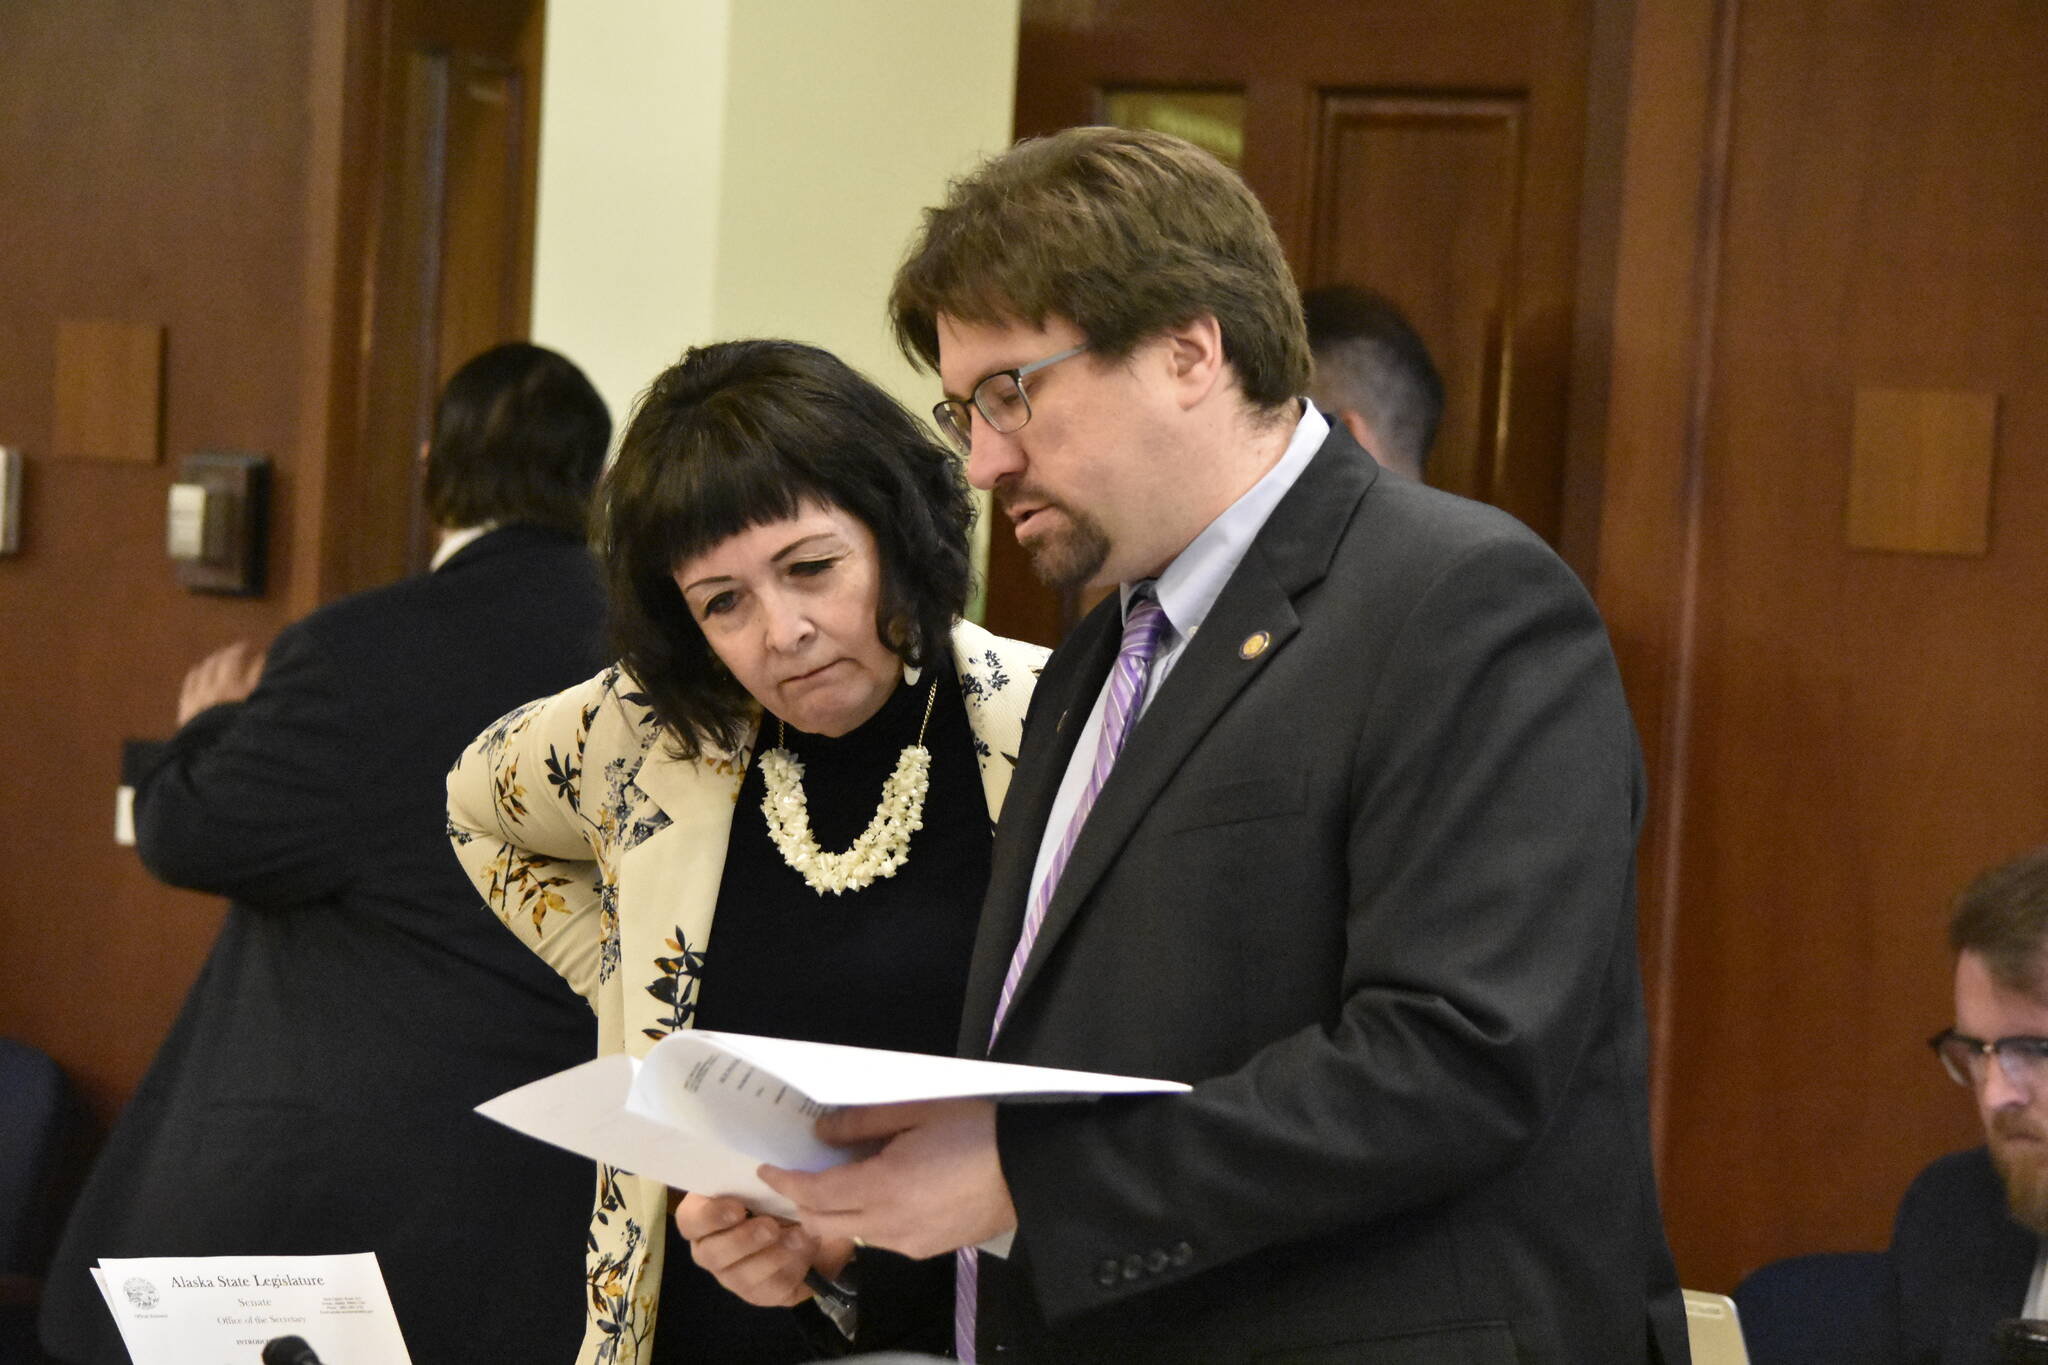 Sens. Shelley Hughes, R-Palmer, left, and Robert Myers, R-North Pole, read through one of 41 amendments submitted to the state’s omnibus budget bill being debate on the floor of the Alaska State Senate on Monday, May 9, 2022. (Peter Segall / Juneau Empire)